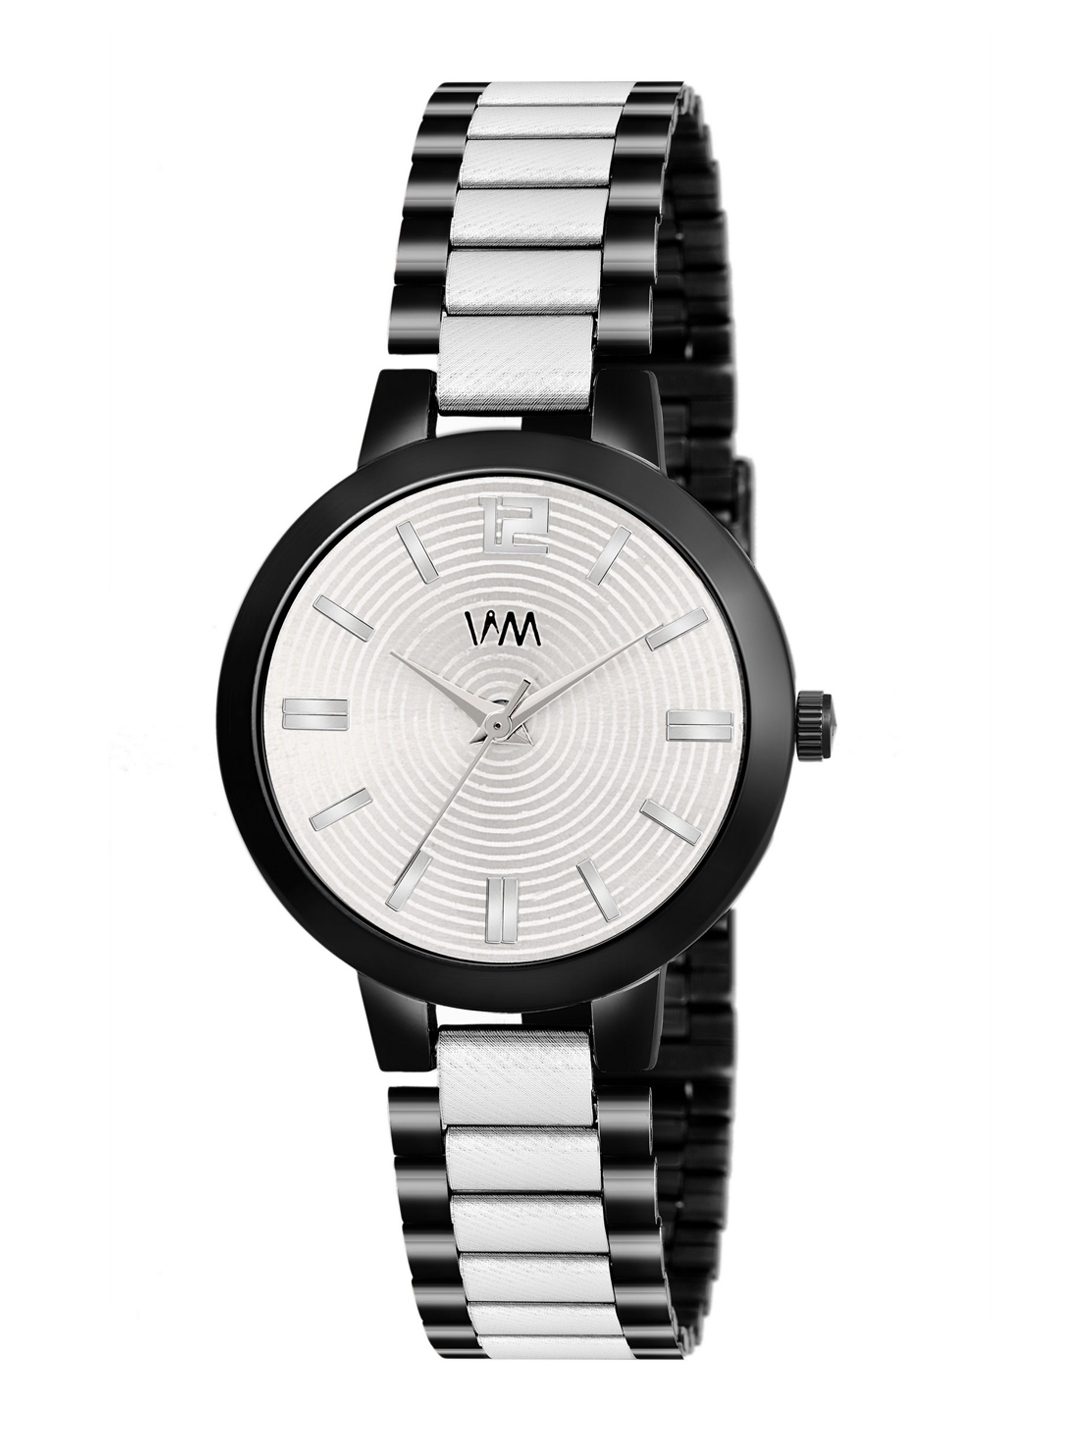 Watch Me Women Silver Toned Dial   Silver Toned Analogue Watches   PP 028